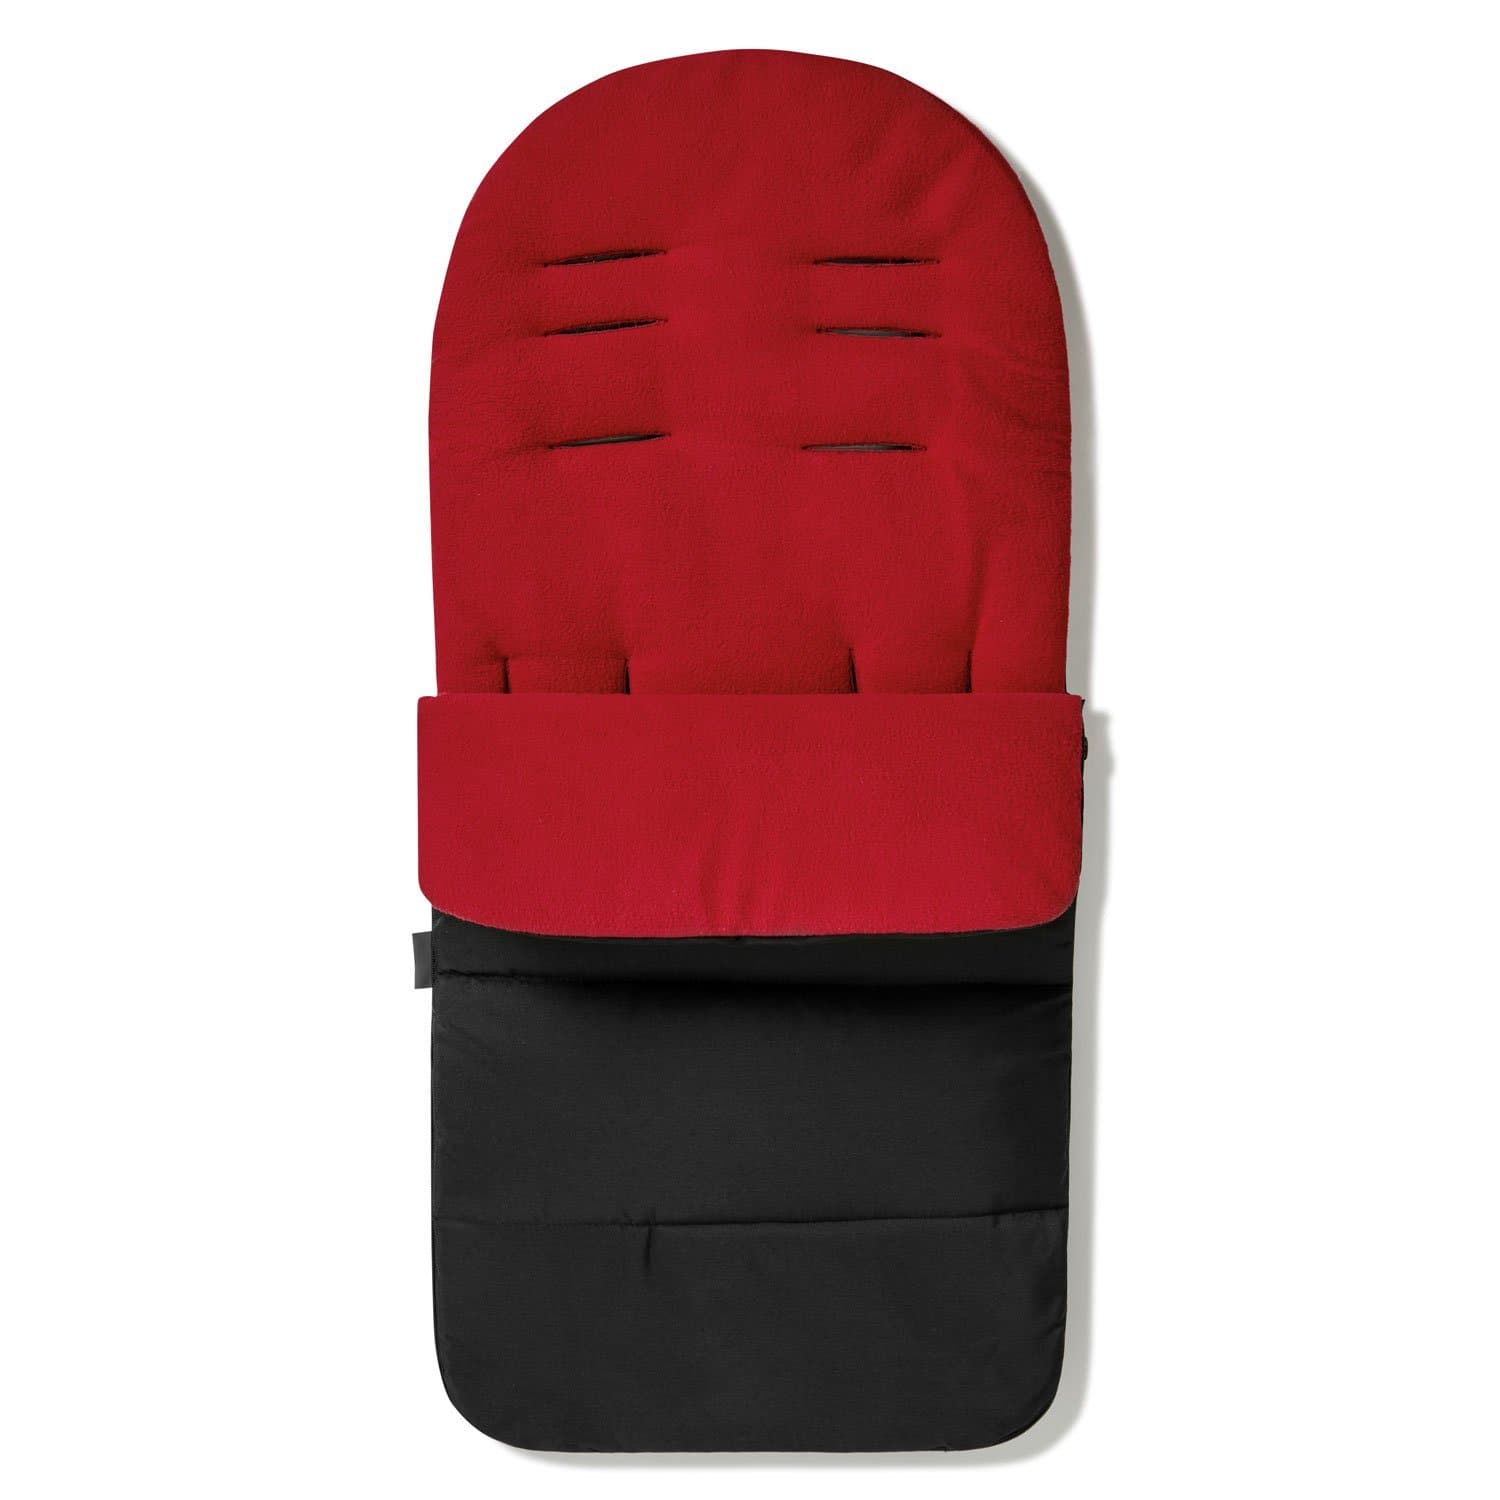 Premium Footmuff / Cosy Toes Compatible with Babylo - Fire Red / Fits All Models | For Your Little One